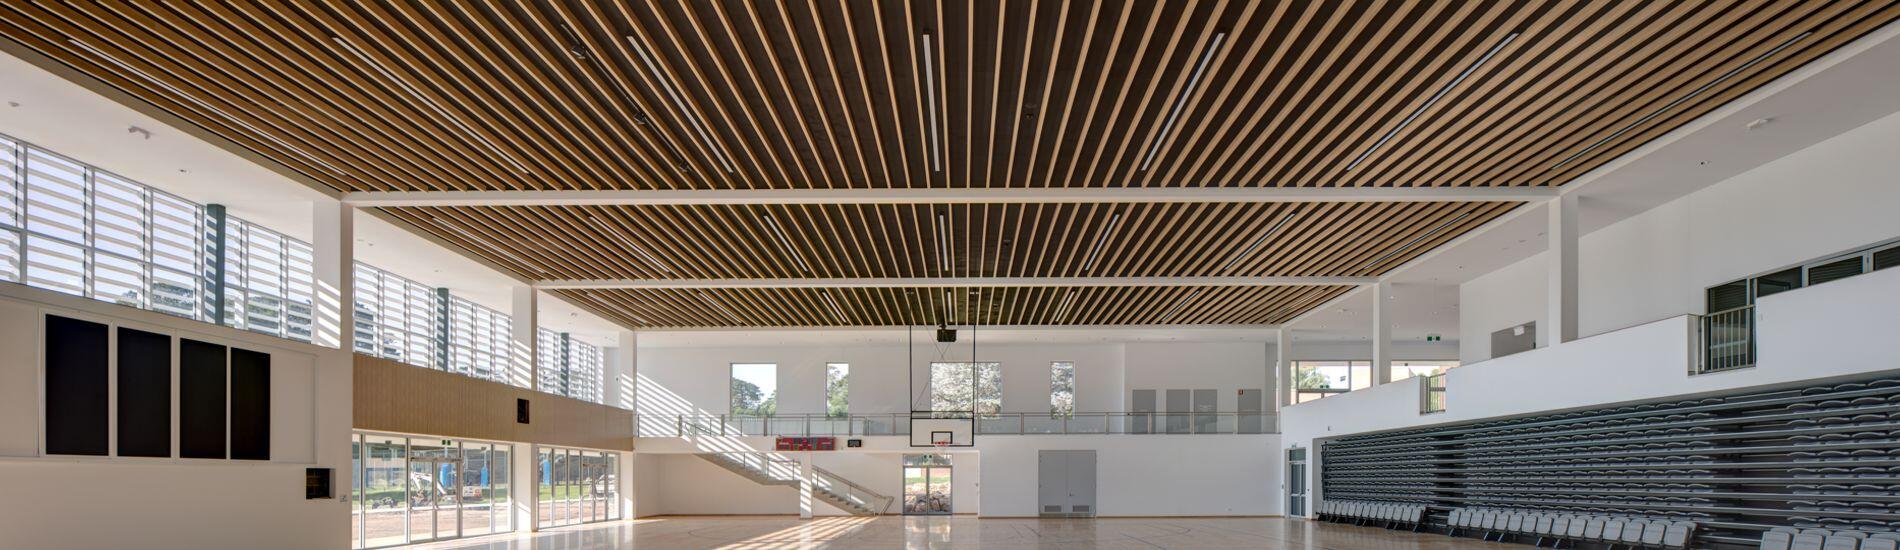 MAXI BEAM Ceiling Beams and SUPACOUSTIC Acoustic Wall Panels for Multipurpose School Hall